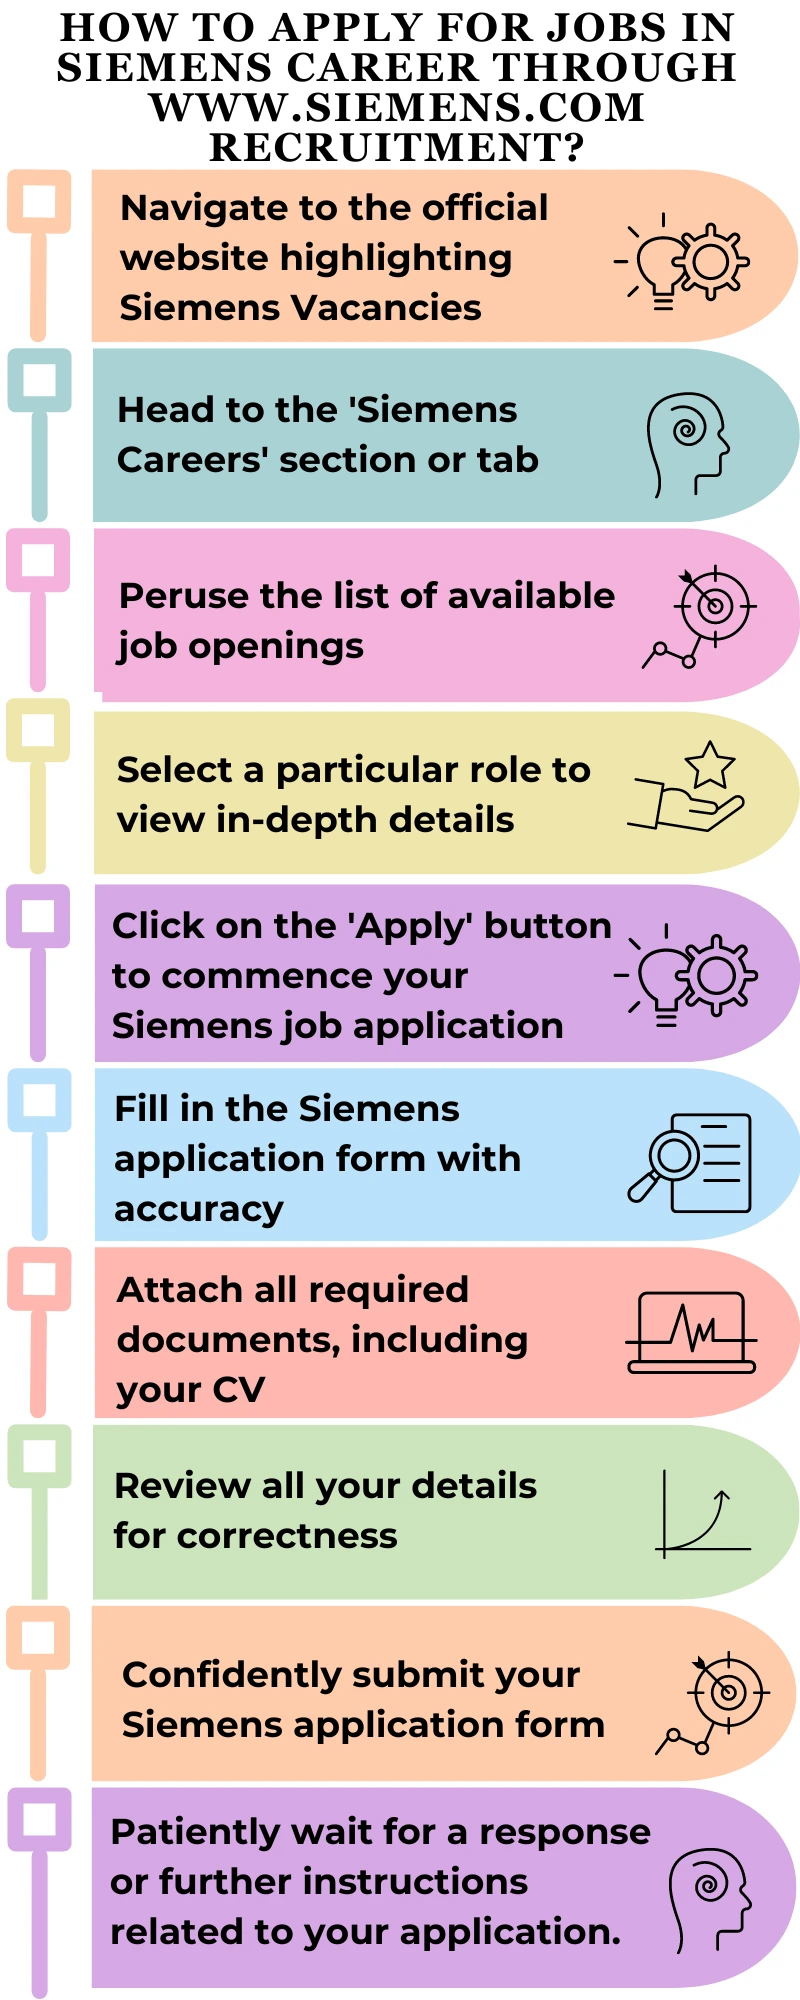 How to Apply for Jobs in Siemens Career through www.siemens.com recruitment?